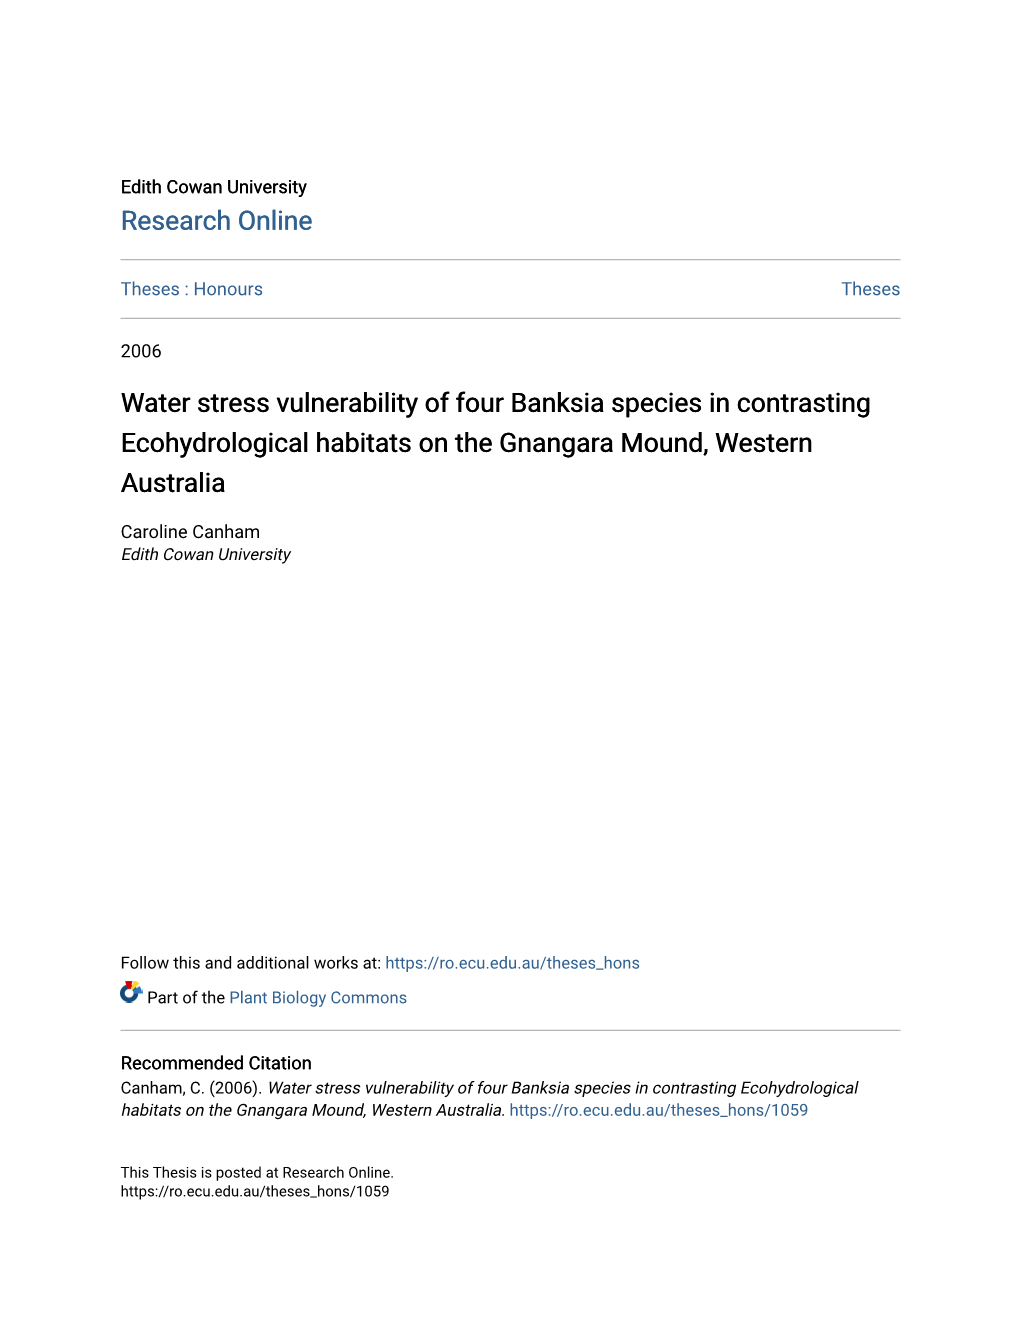 Water Stress Vulnerability of Four Banksia Species in Contrasting Ecohydrological Habitats on the Gnangara Mound, Western Australia